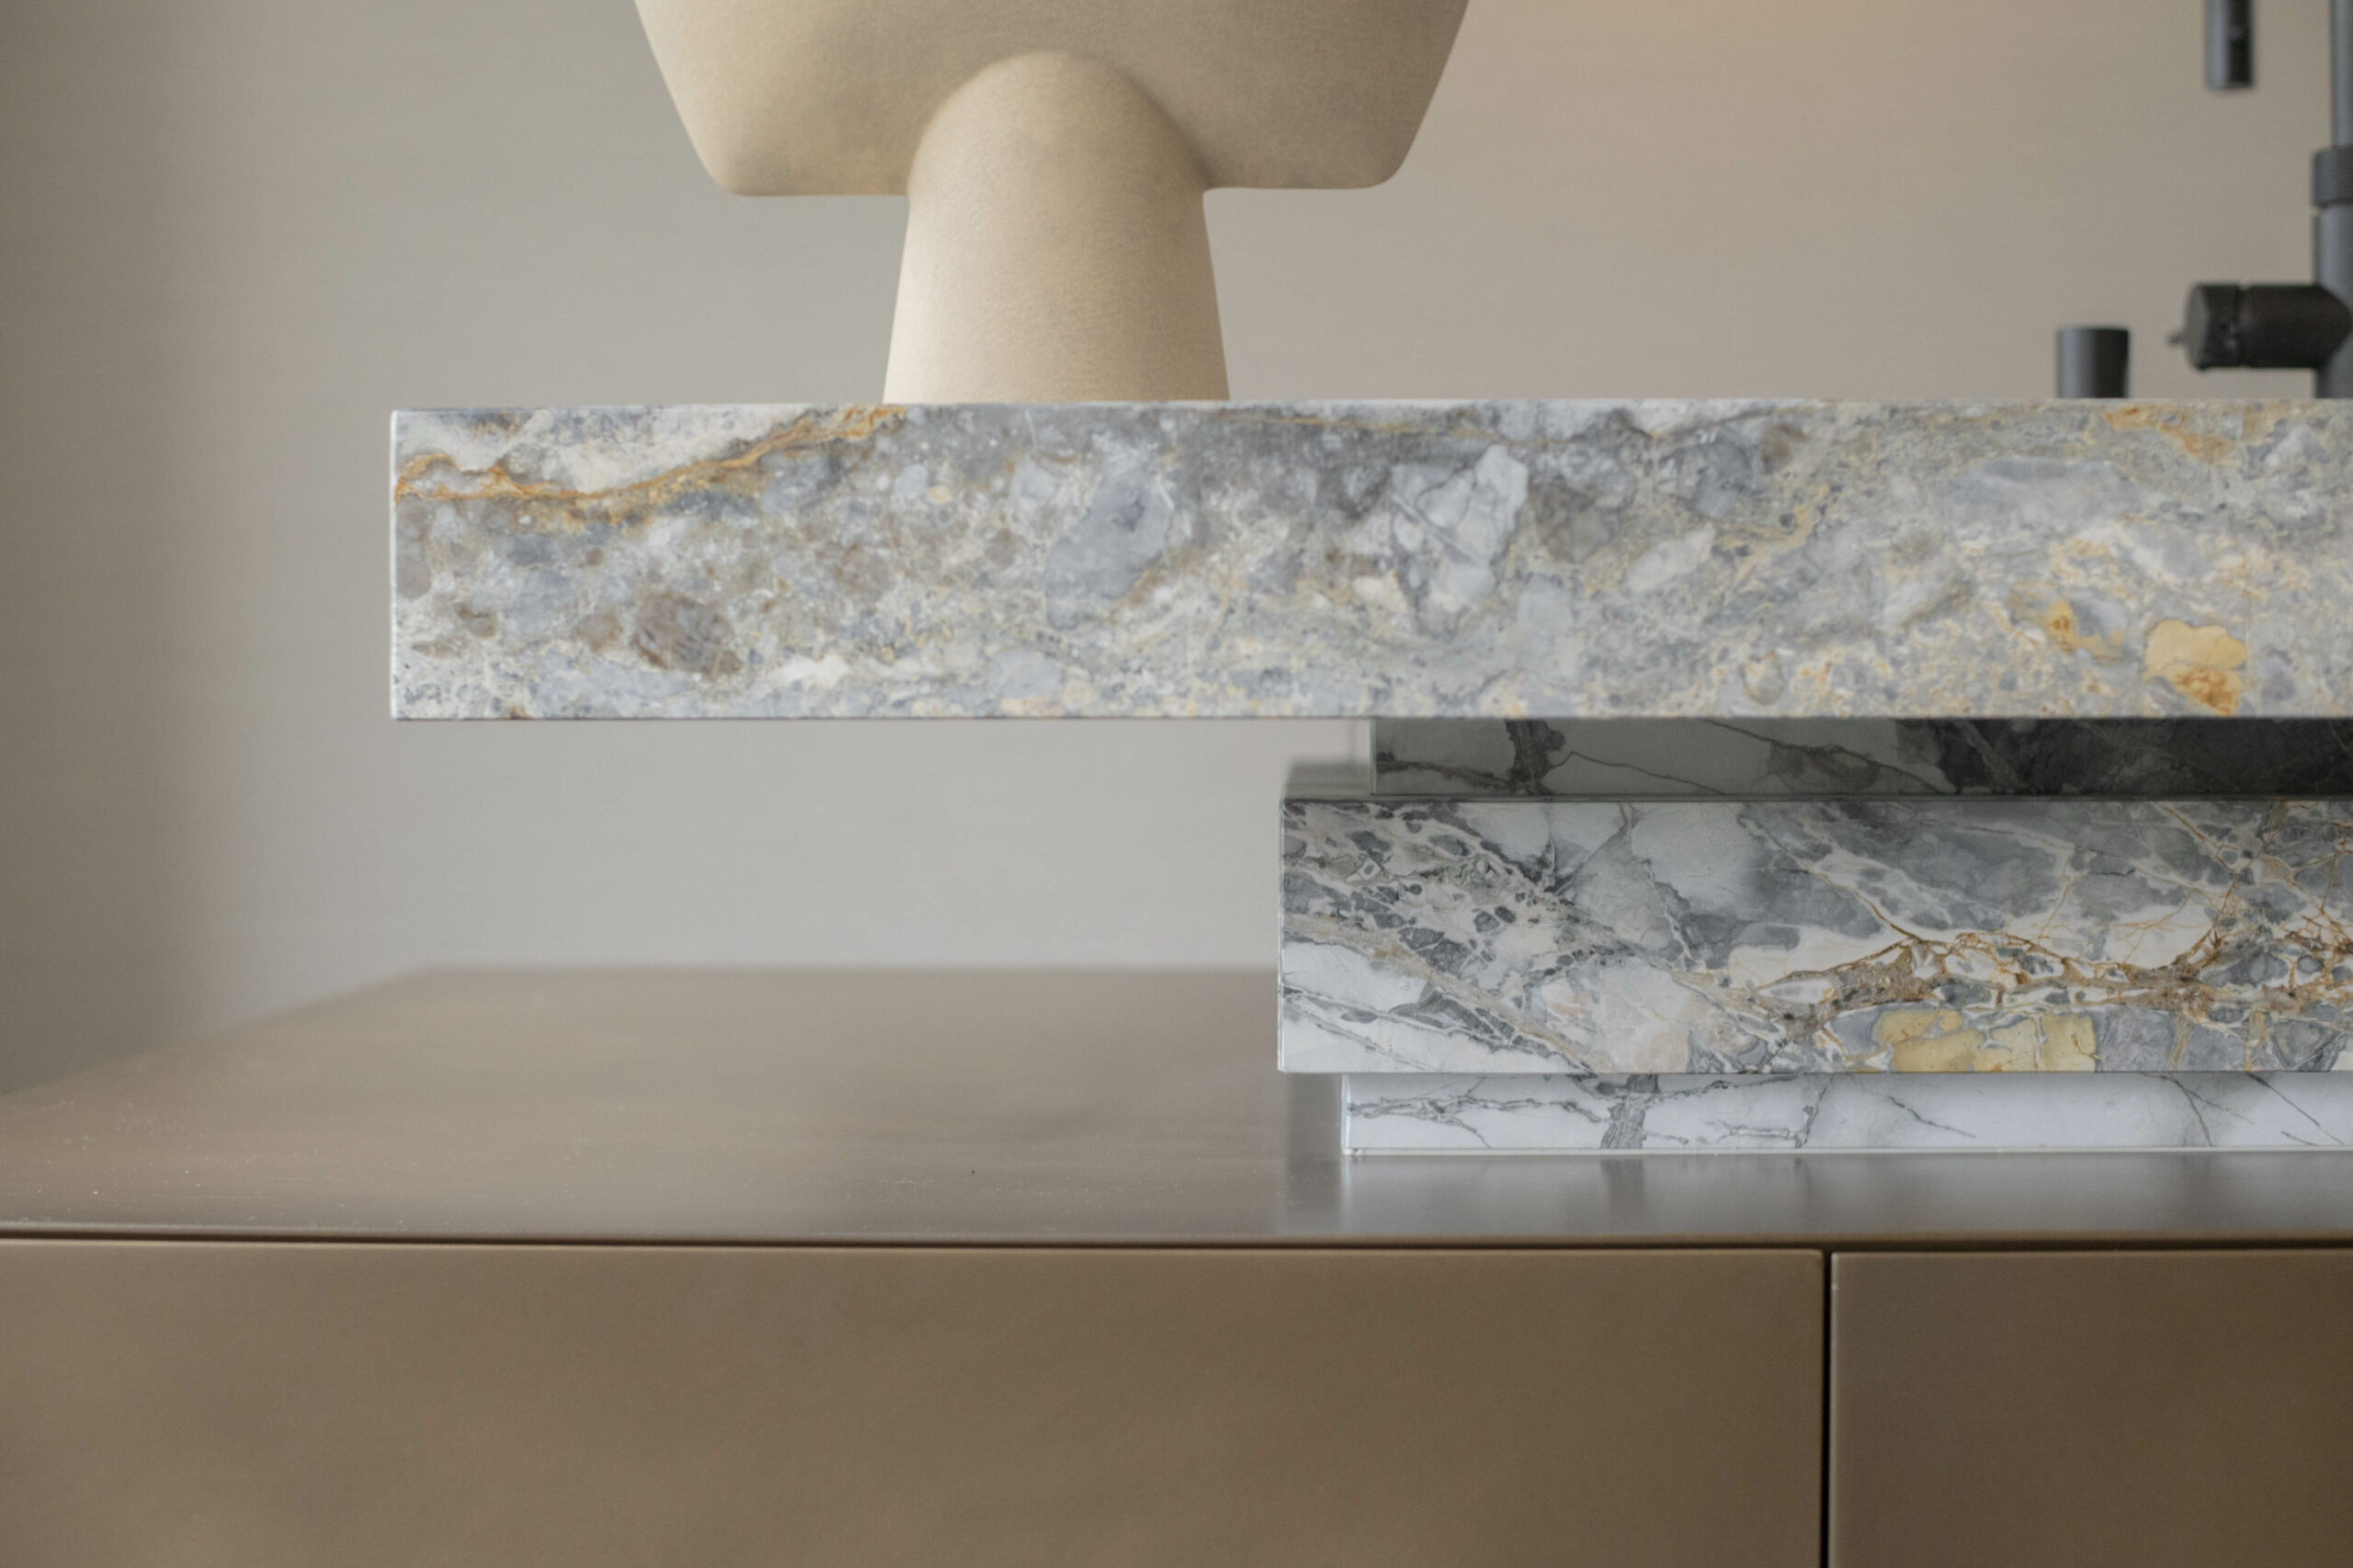 A modern interior with sleek beige surfaces and intricately veined marble slabs, complemented by a sculptural object above.